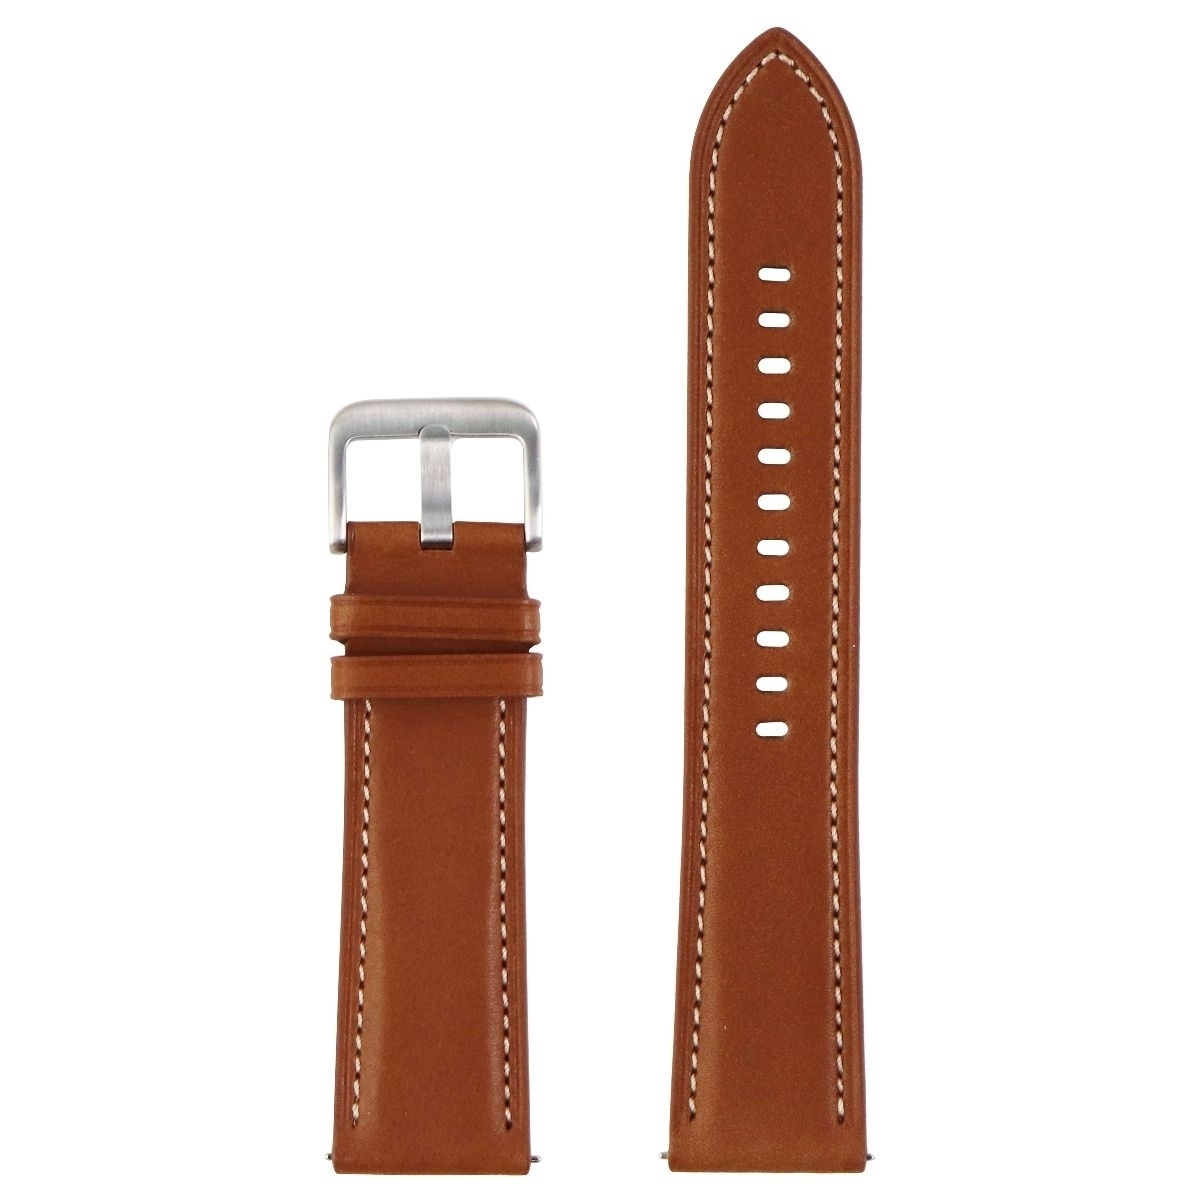 Samsung Leather Stitch Band For 20mm Watches - Brown (ET-SLR85SAEGUJ)